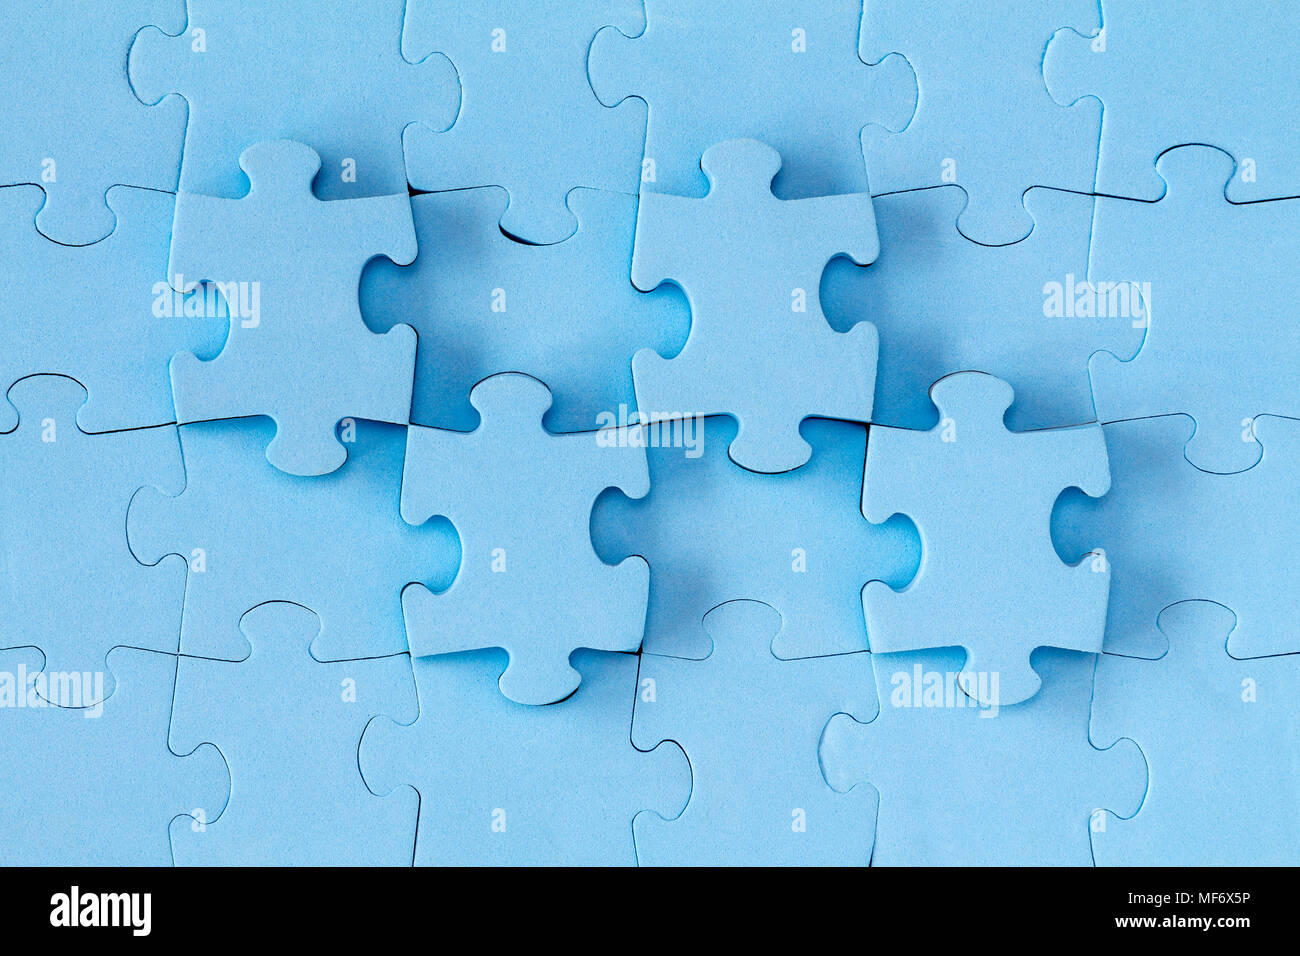 Abstract background made of blue puzzle pieces Stock Photo